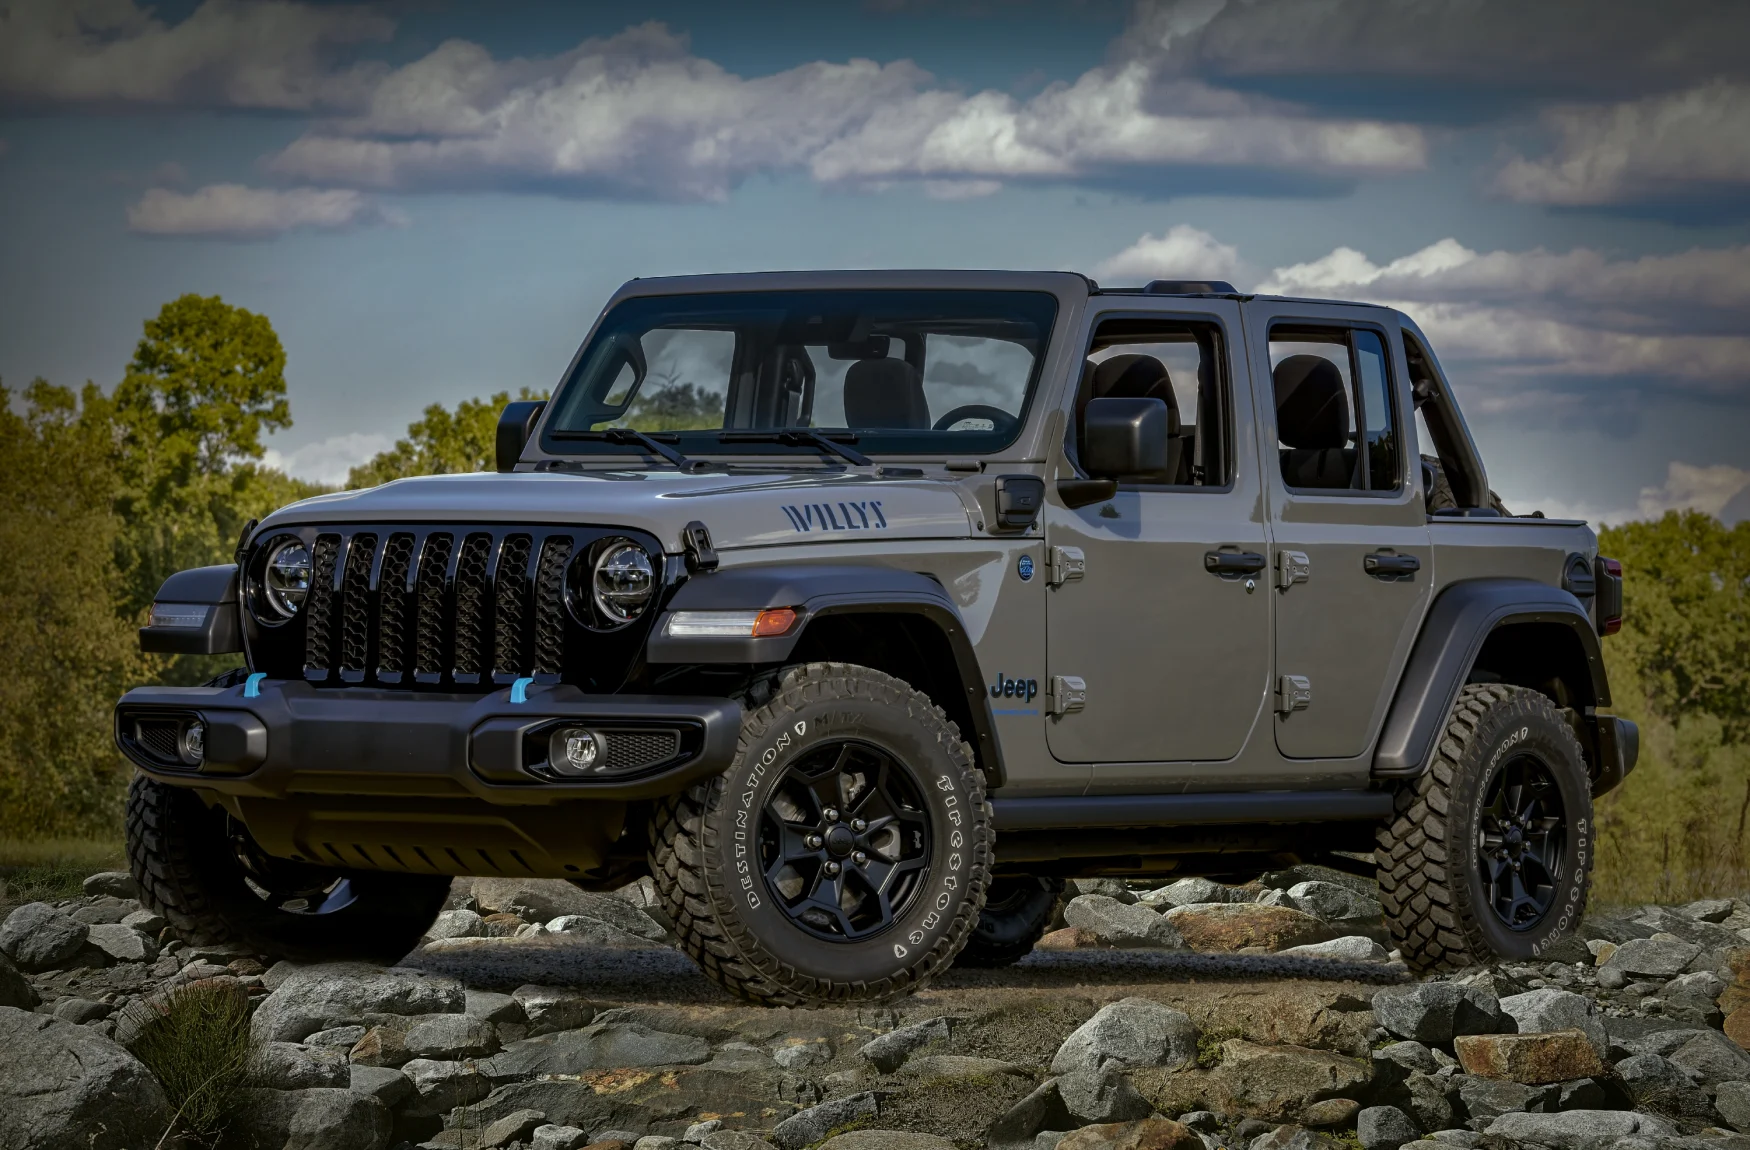 Jeep adds new Grand Cherokee and Wrangler trims to its 4xe lineup | Engadget